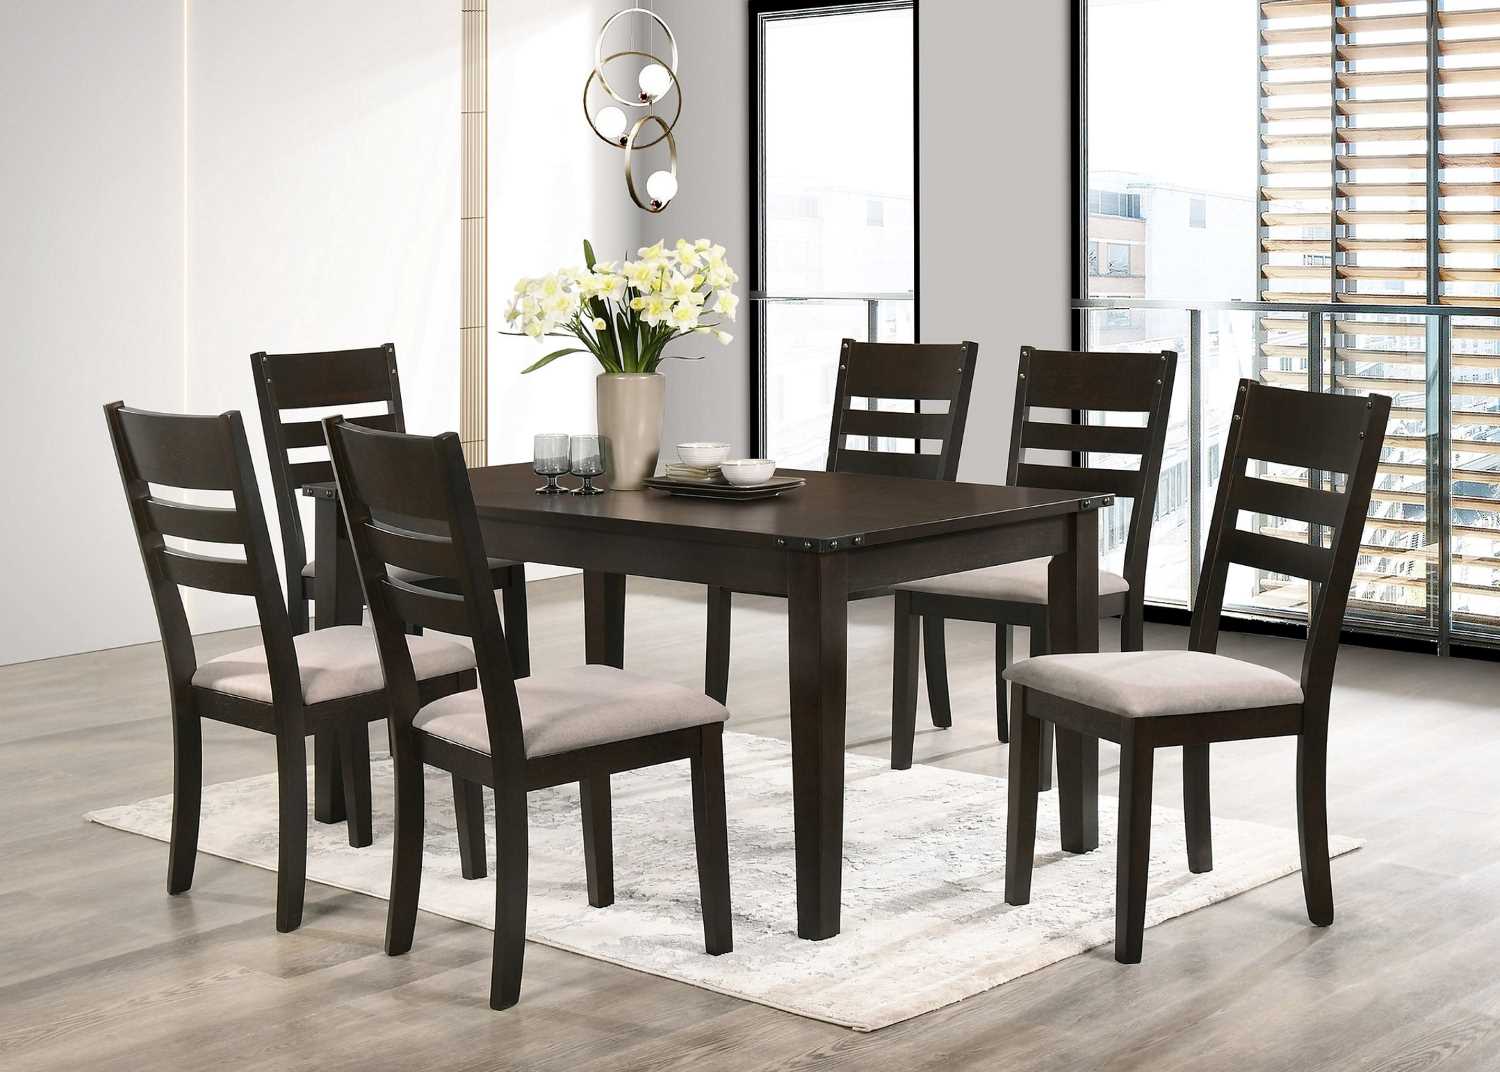 Dining Collection Espresso T-1090 / C-1092